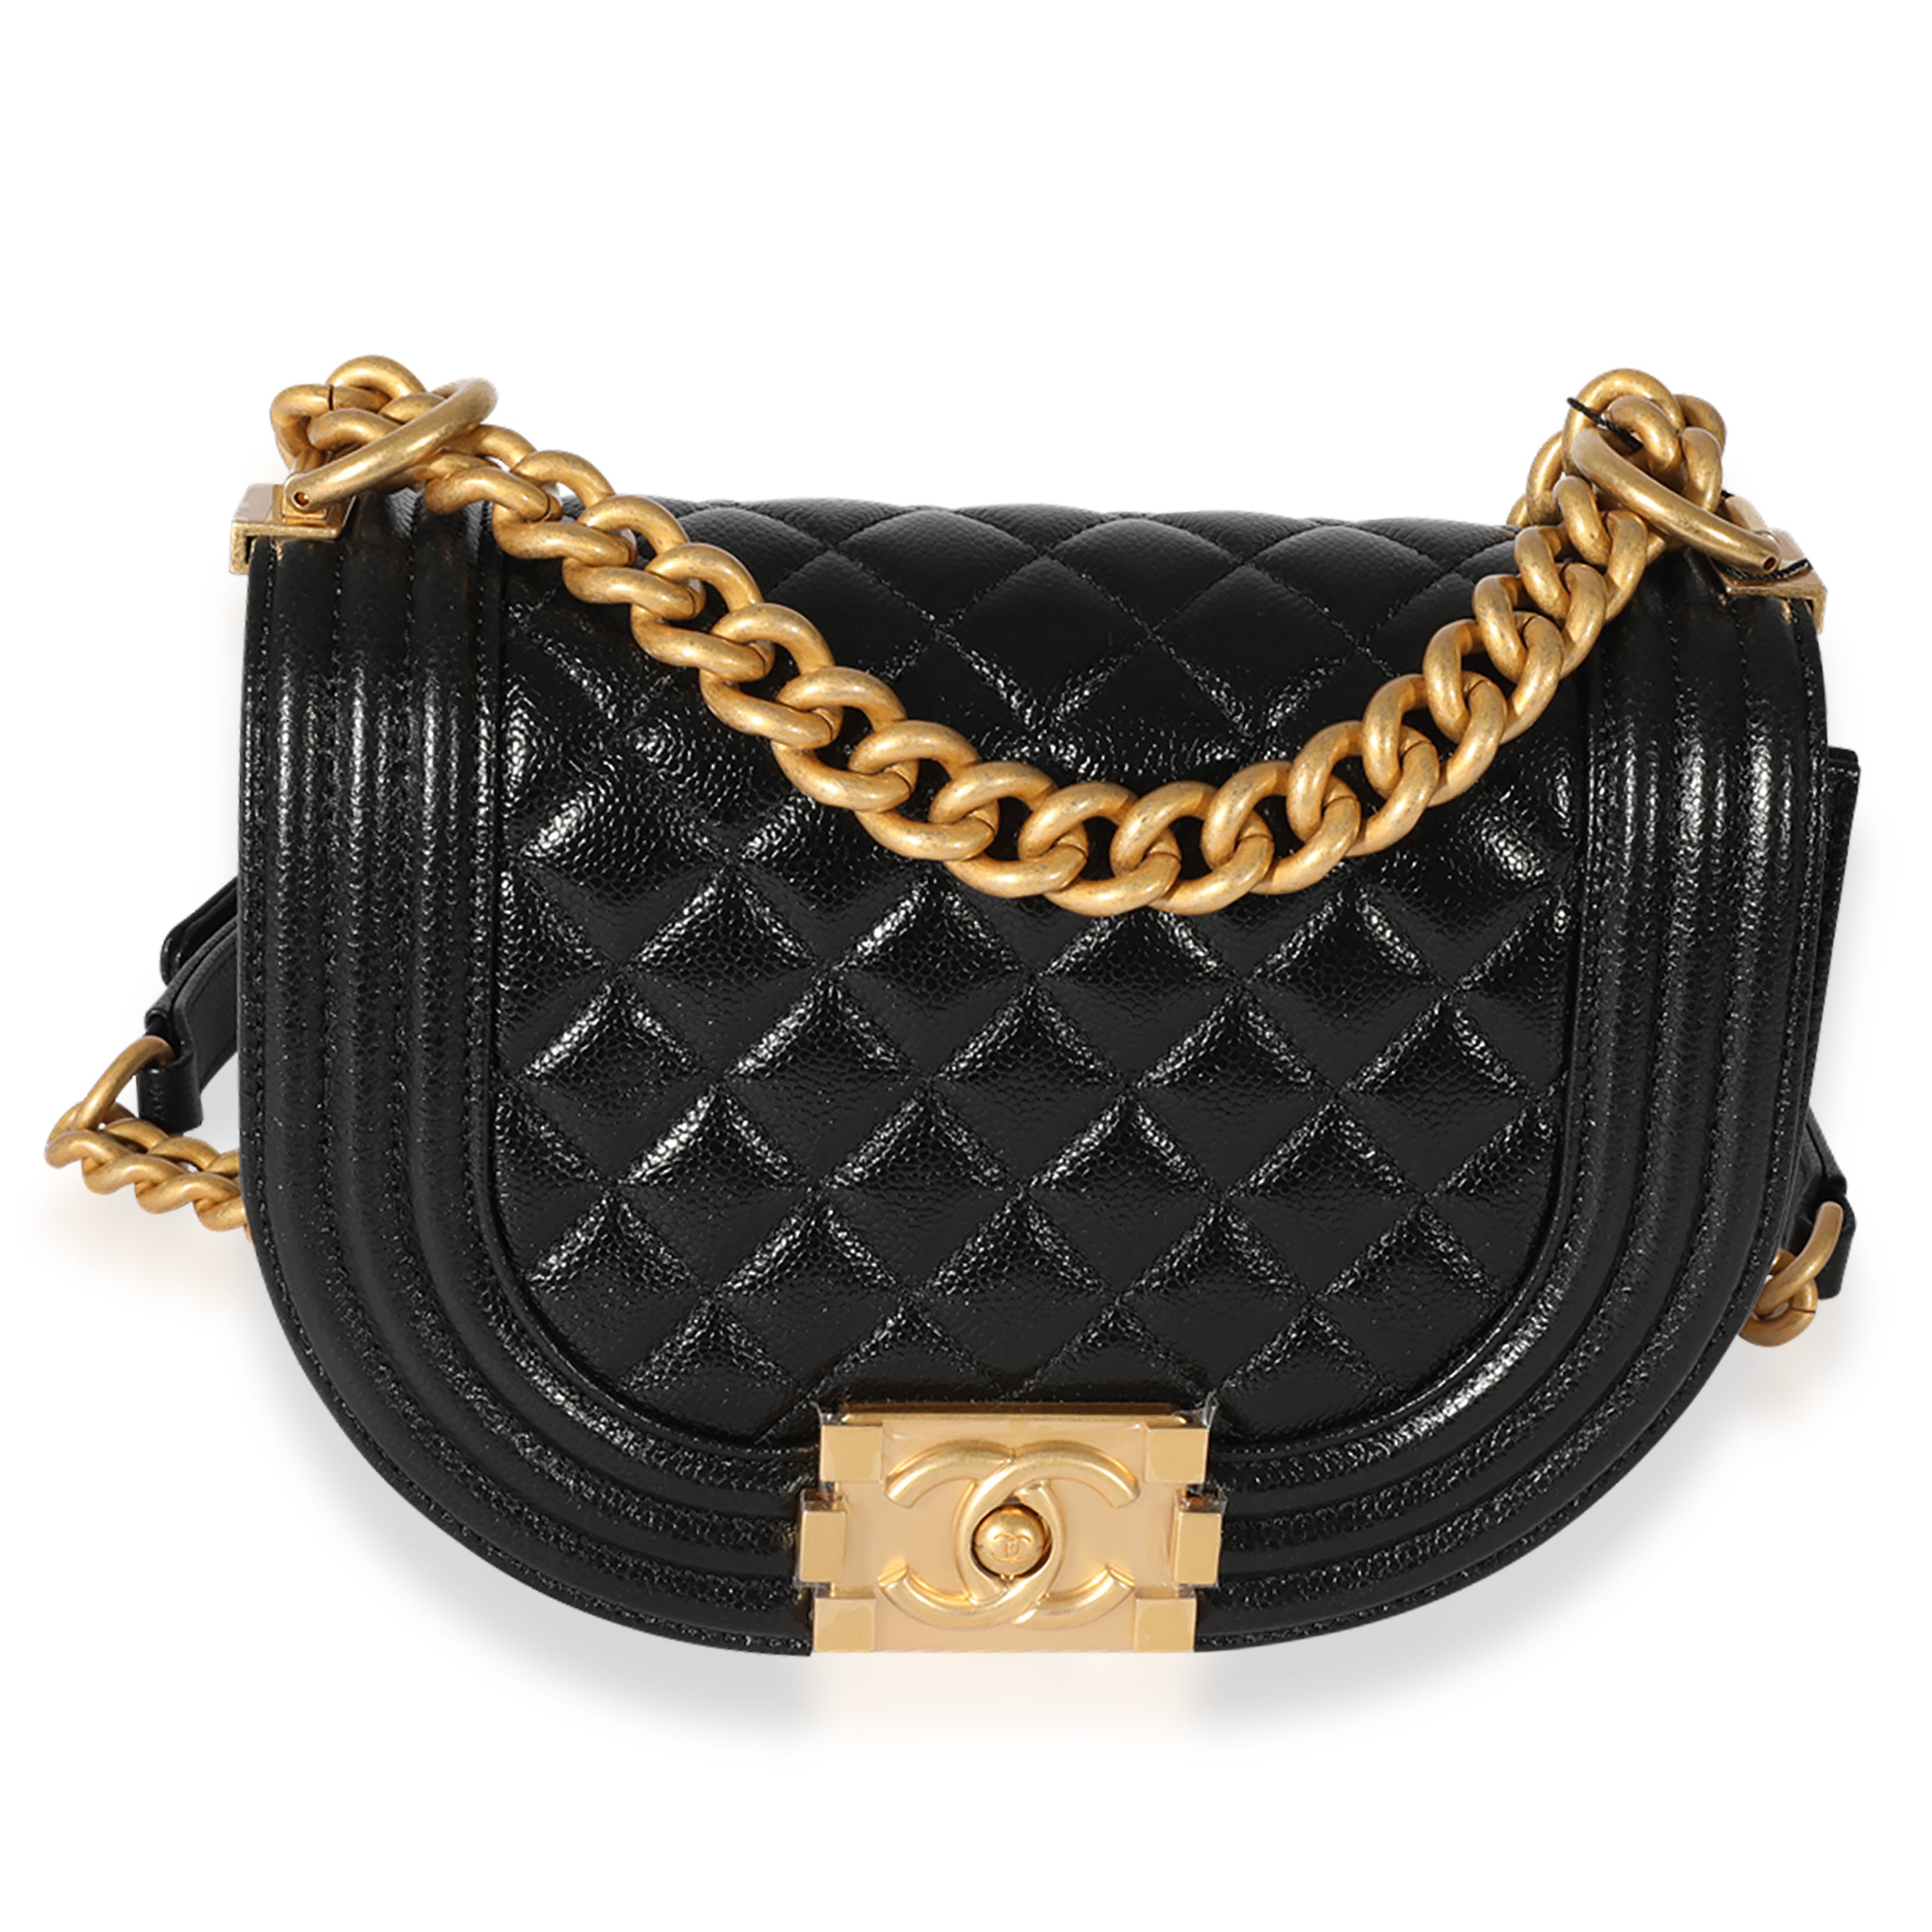 Chanel Boy Flap Bag Strass Embellished Leather Small